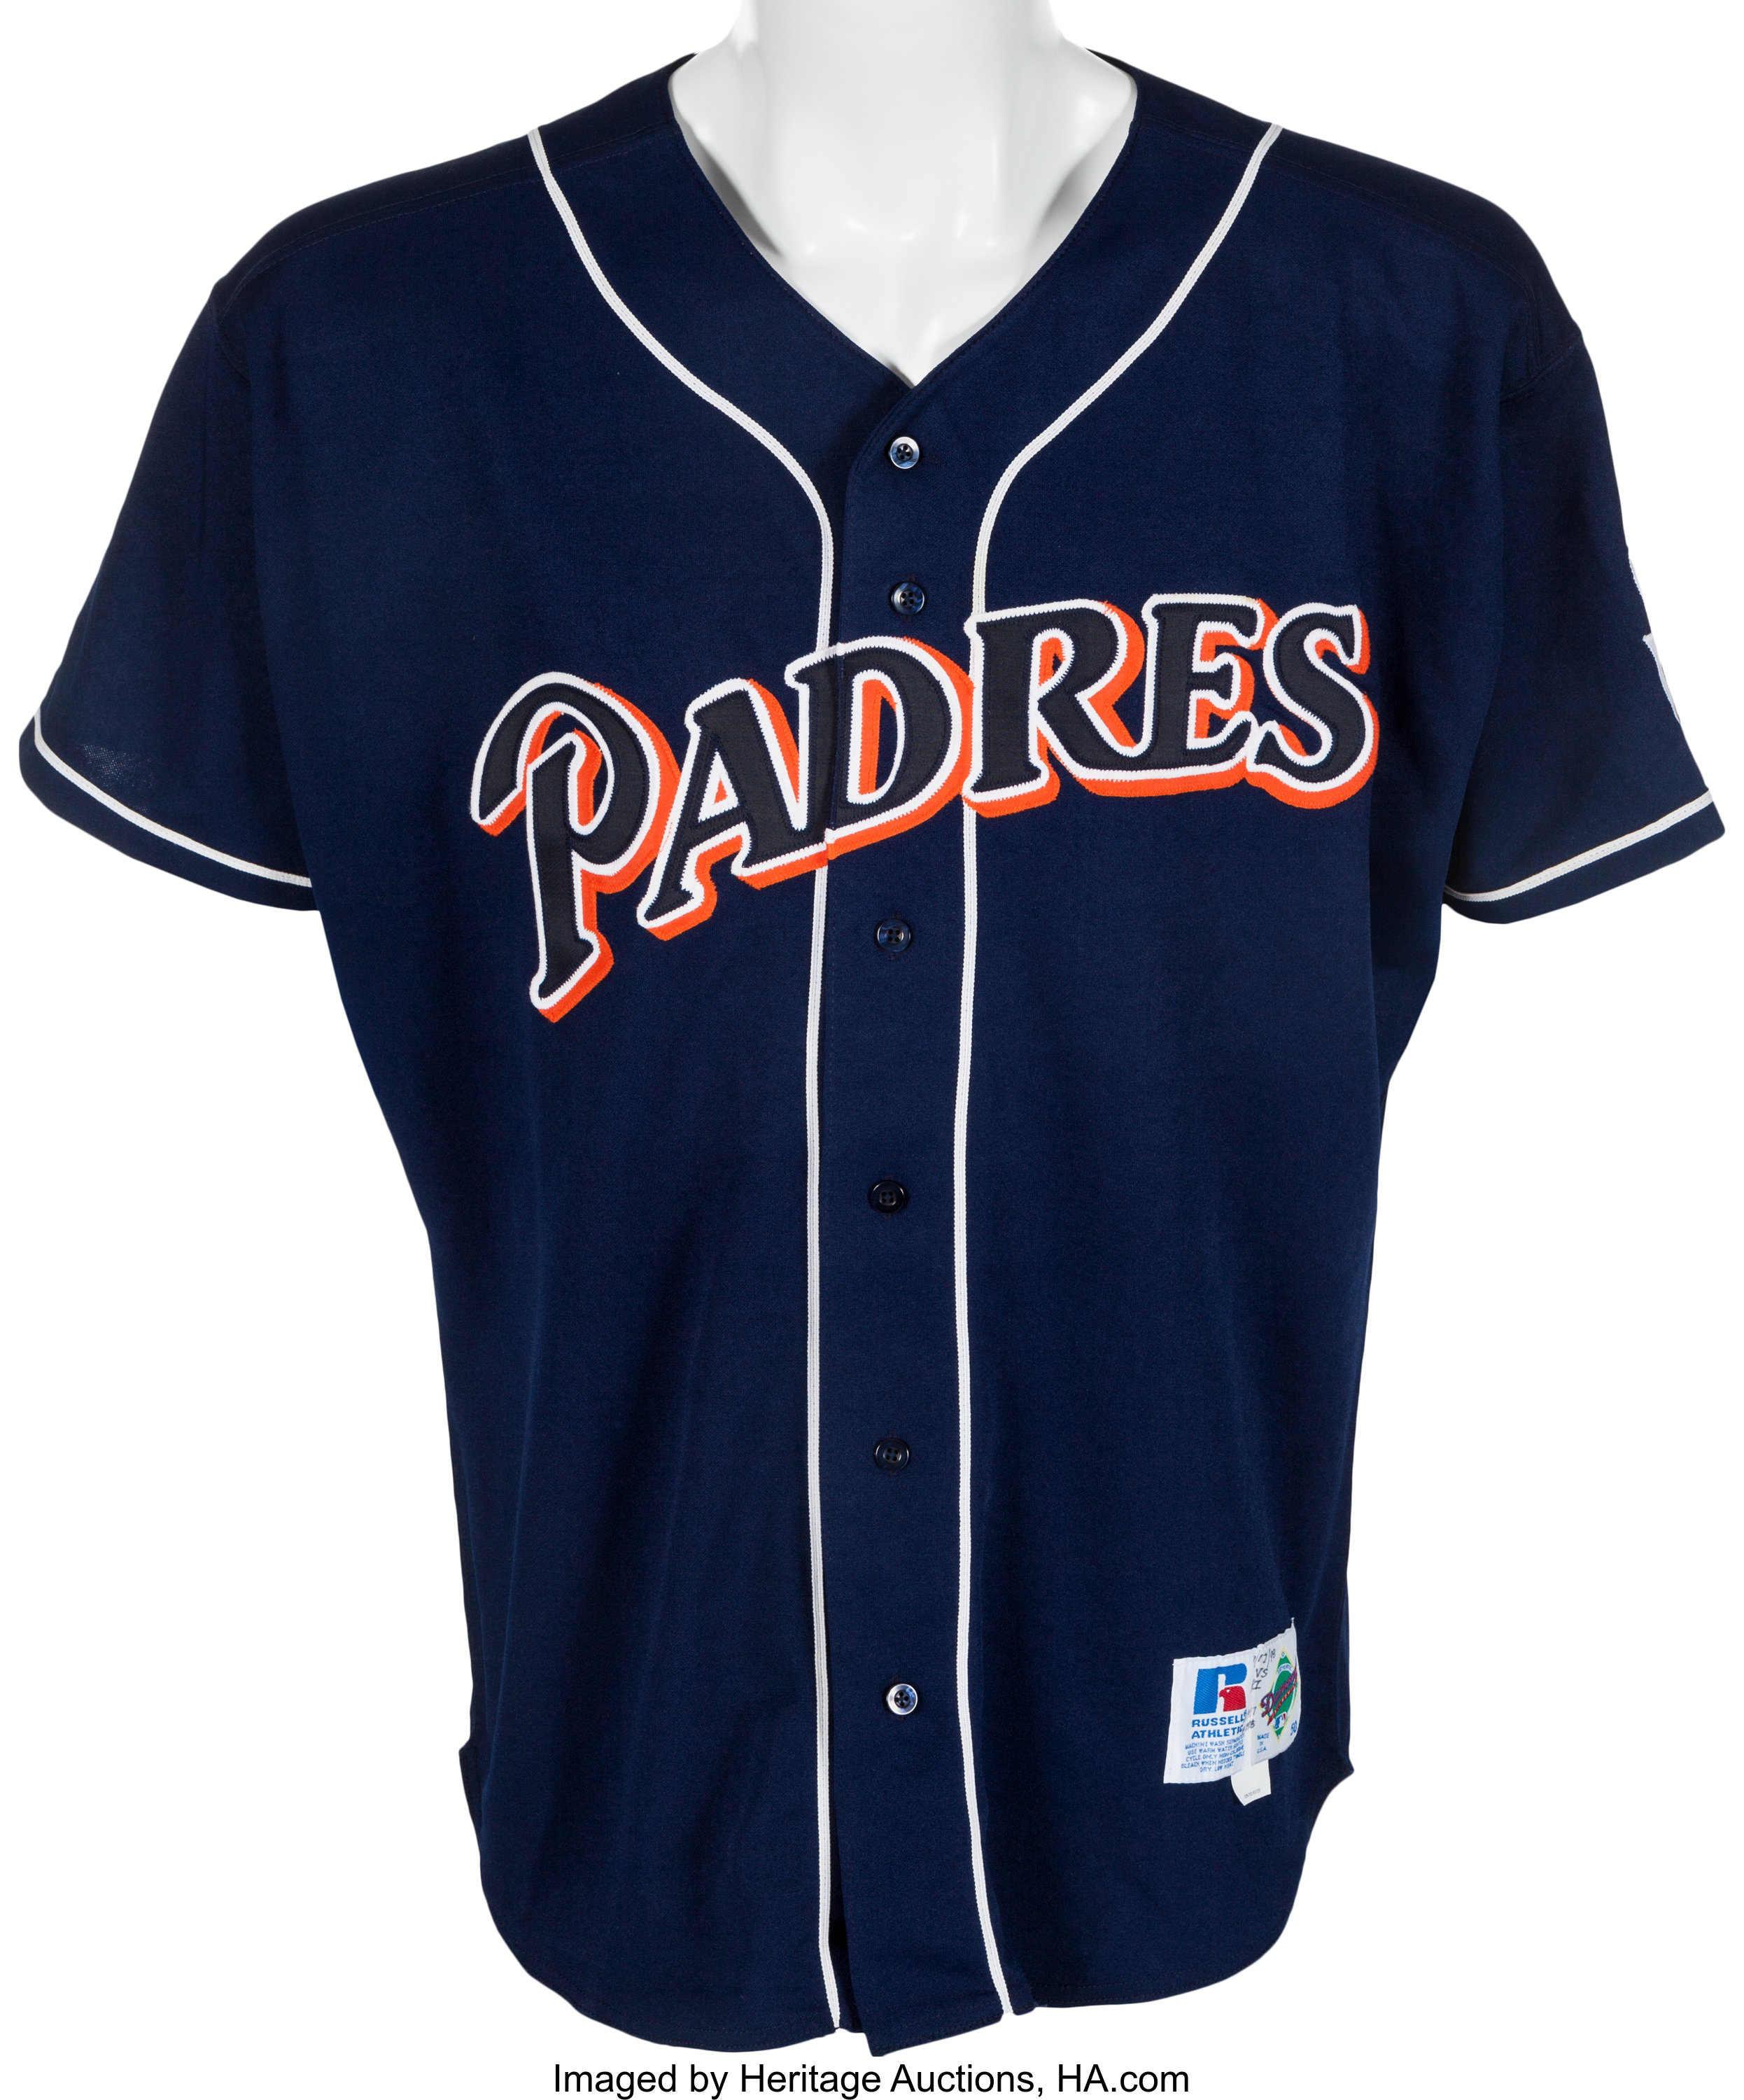 San Diego Padres on X: Patches to honor Tony Gwynn added to #Padres  jerseys and batting practice hats #MrPadre  / X